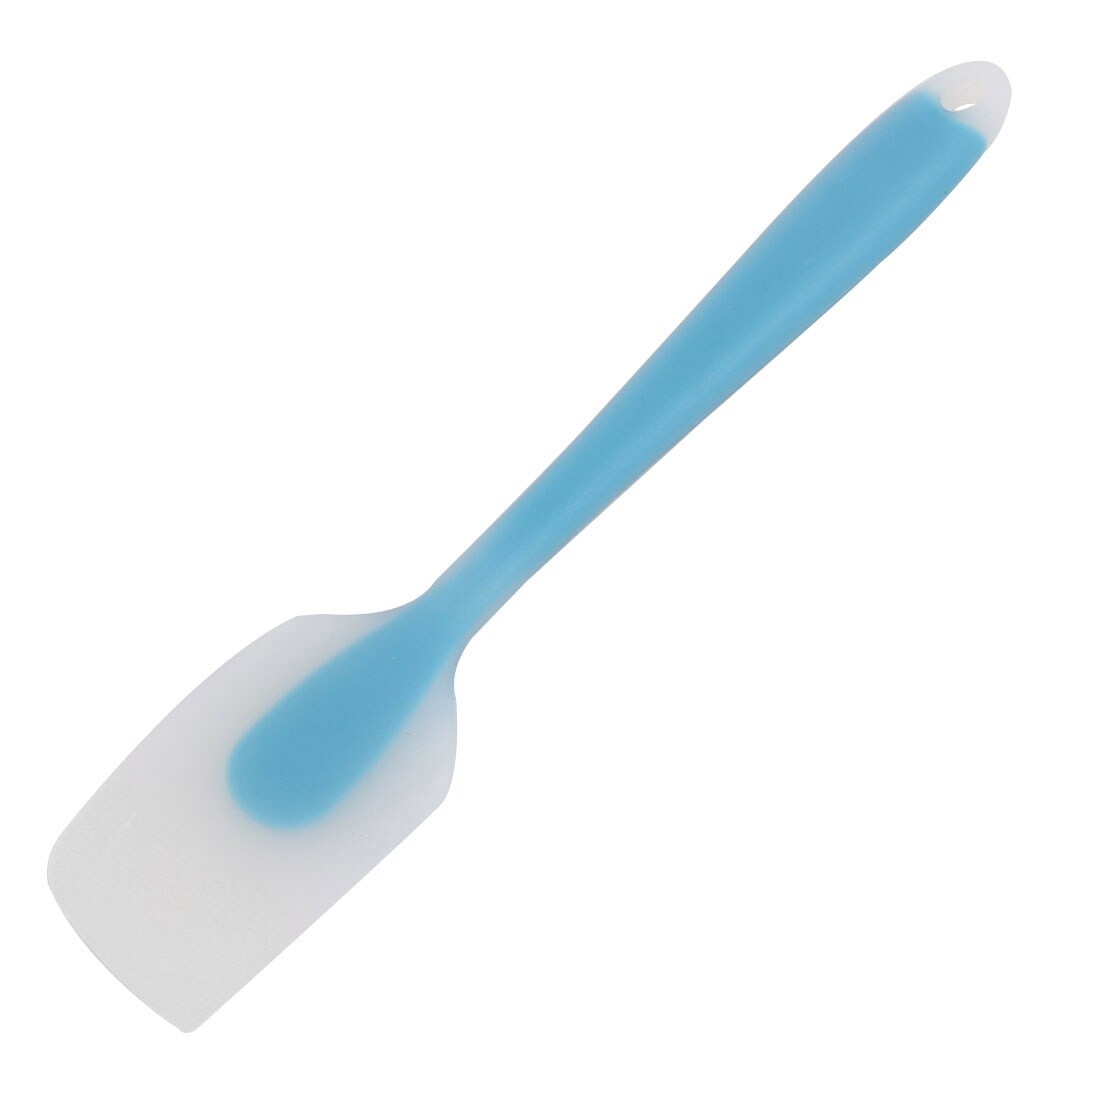 https://ak1.ostkcdn.com/images/products/is/images/direct/5ffebd437e9c23bab3ae8f4bdcdd6973a9836846/Silicone-Cooking-DIY-Tool-Cream-Cake-Butter-Spatula-Spreader-Scraper.jpg